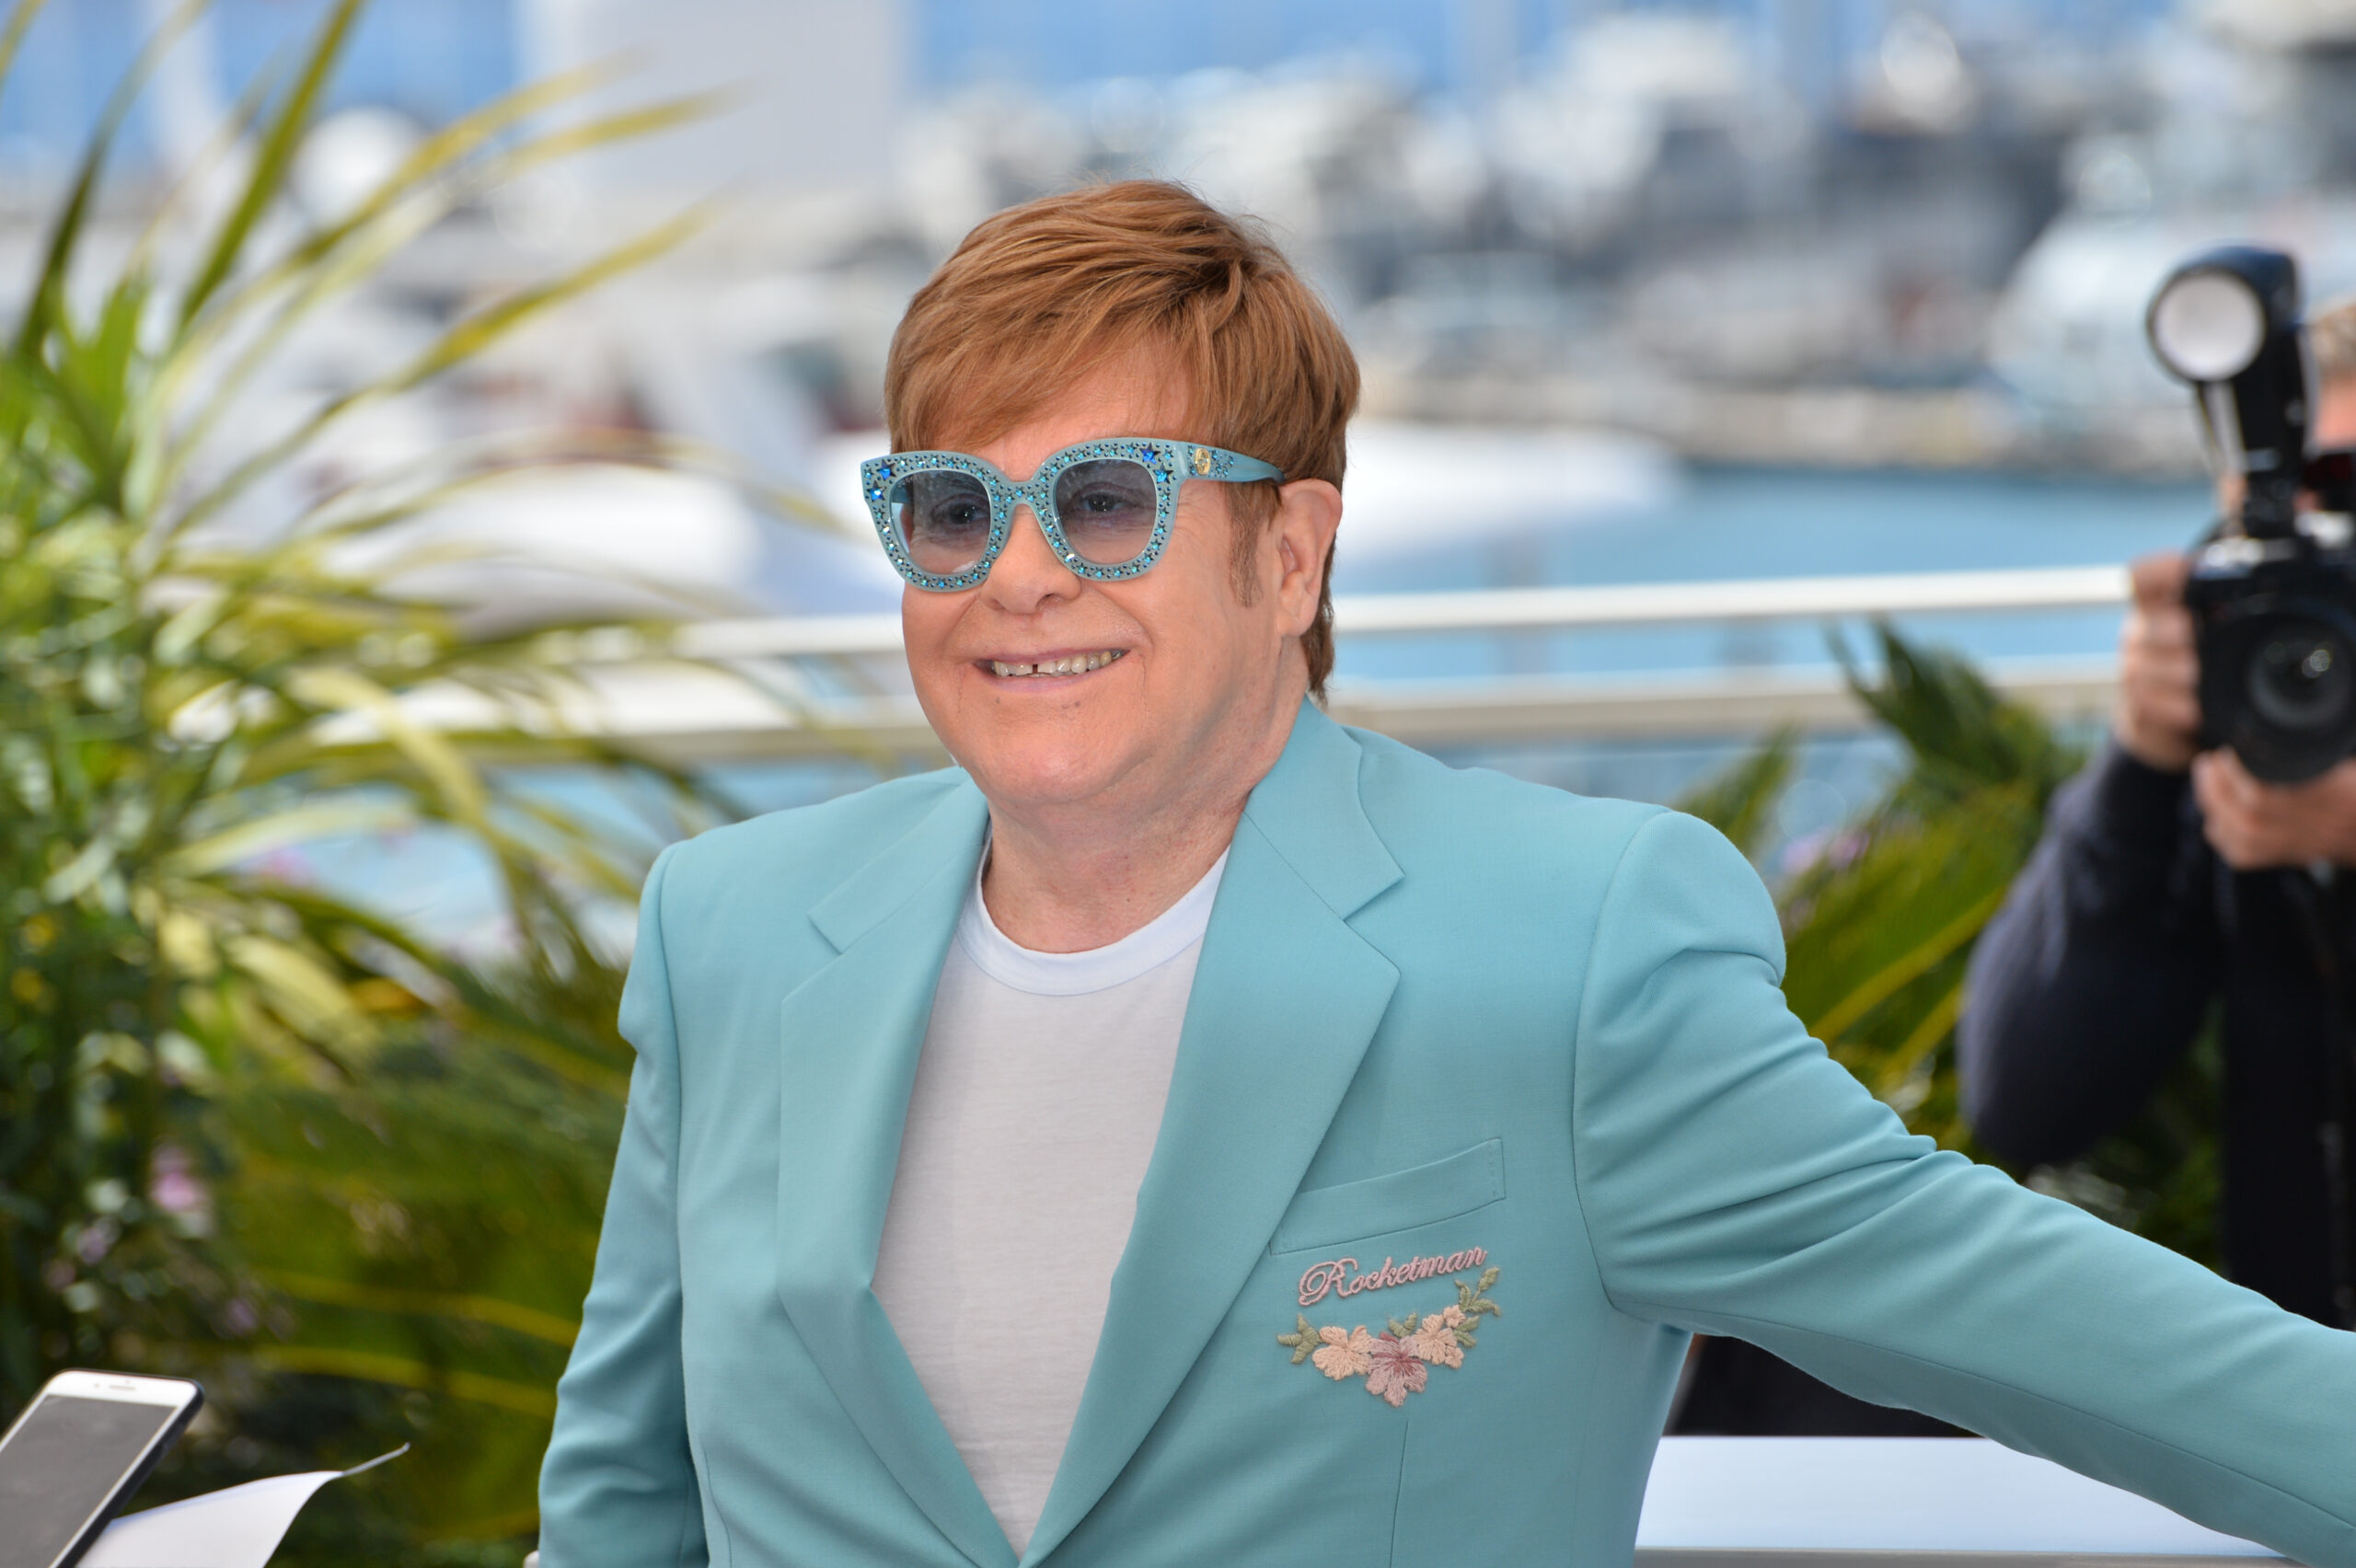 <p>Legendary English singer, pianist, and composer Elton John started his Farewell concert tour in 2018, marking the end of his impressive touring career. Basic ticket prices for the final concert tour of the famous musician averaged around $1,000, while VIP tickets reached $4,500.</p>